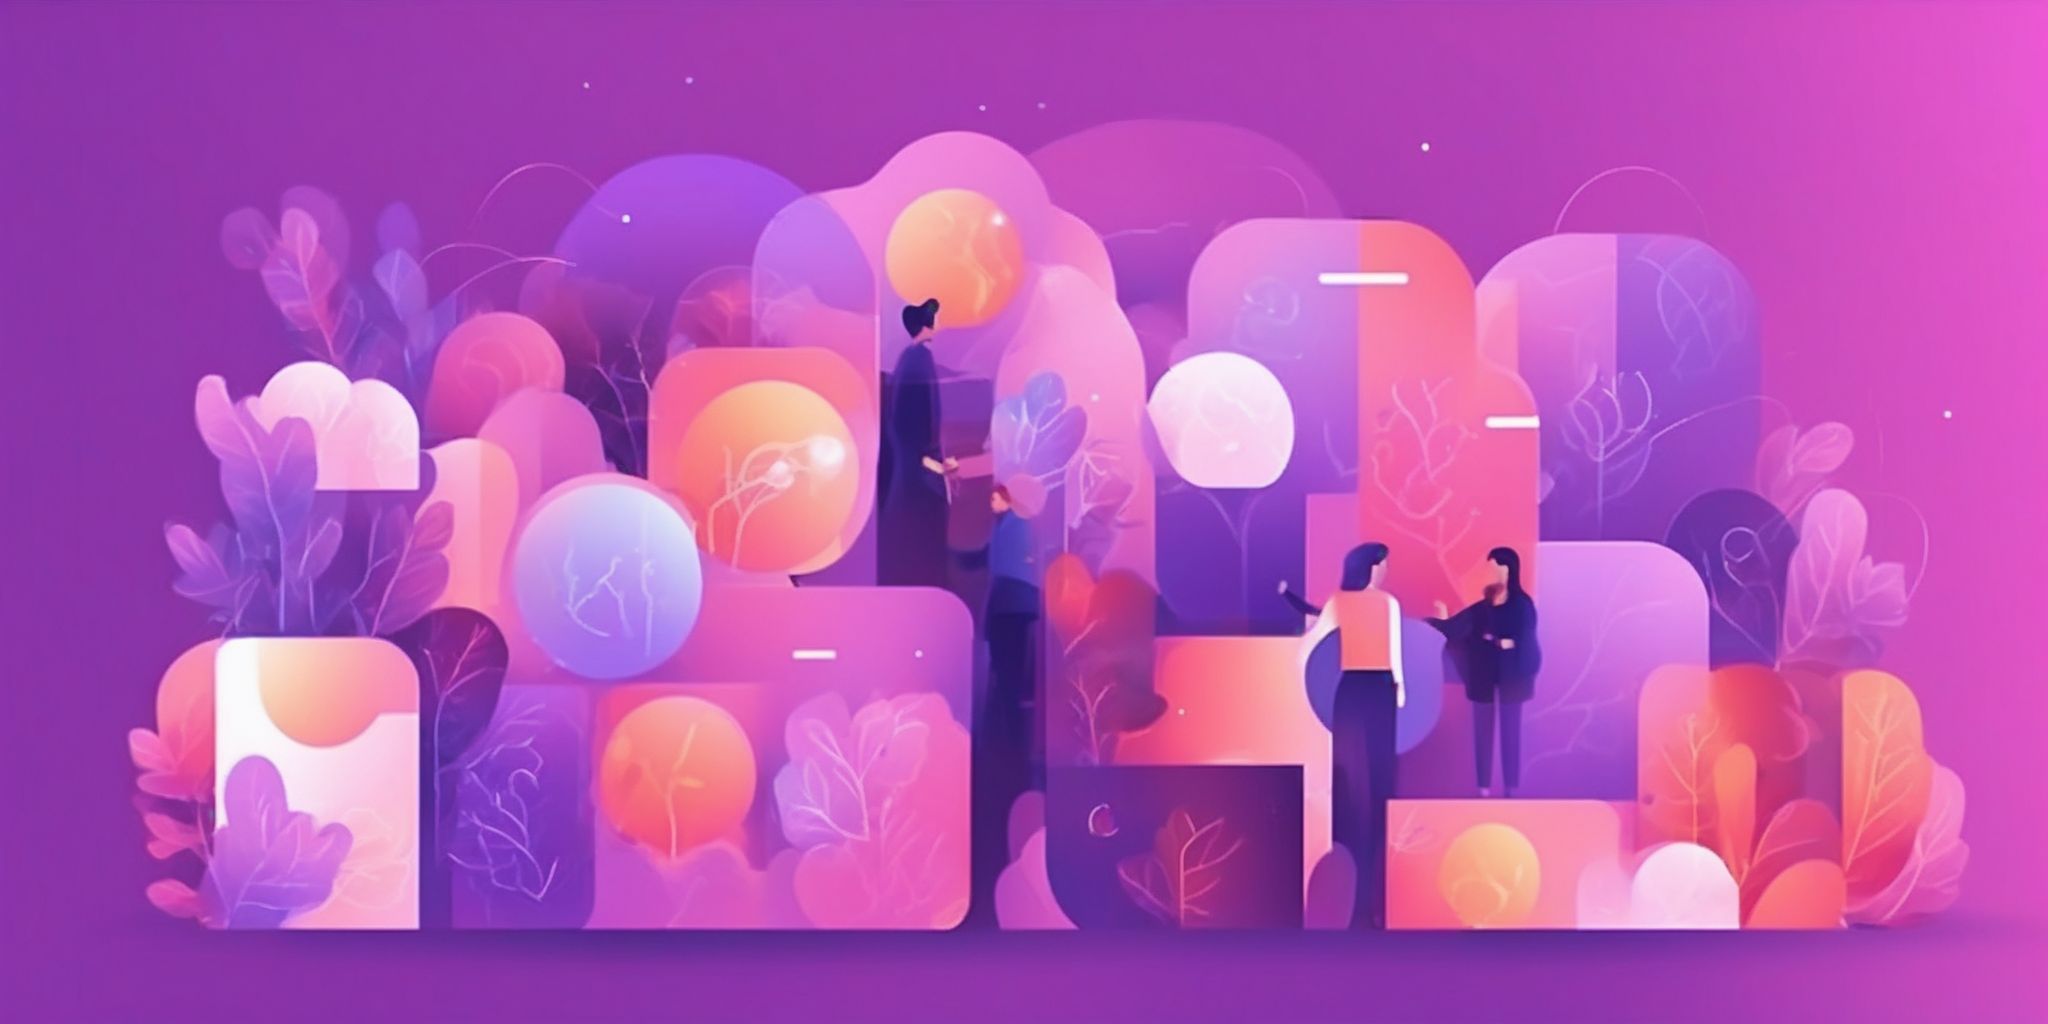 Recommendations in flat illustration style, colorful purple gradient colors